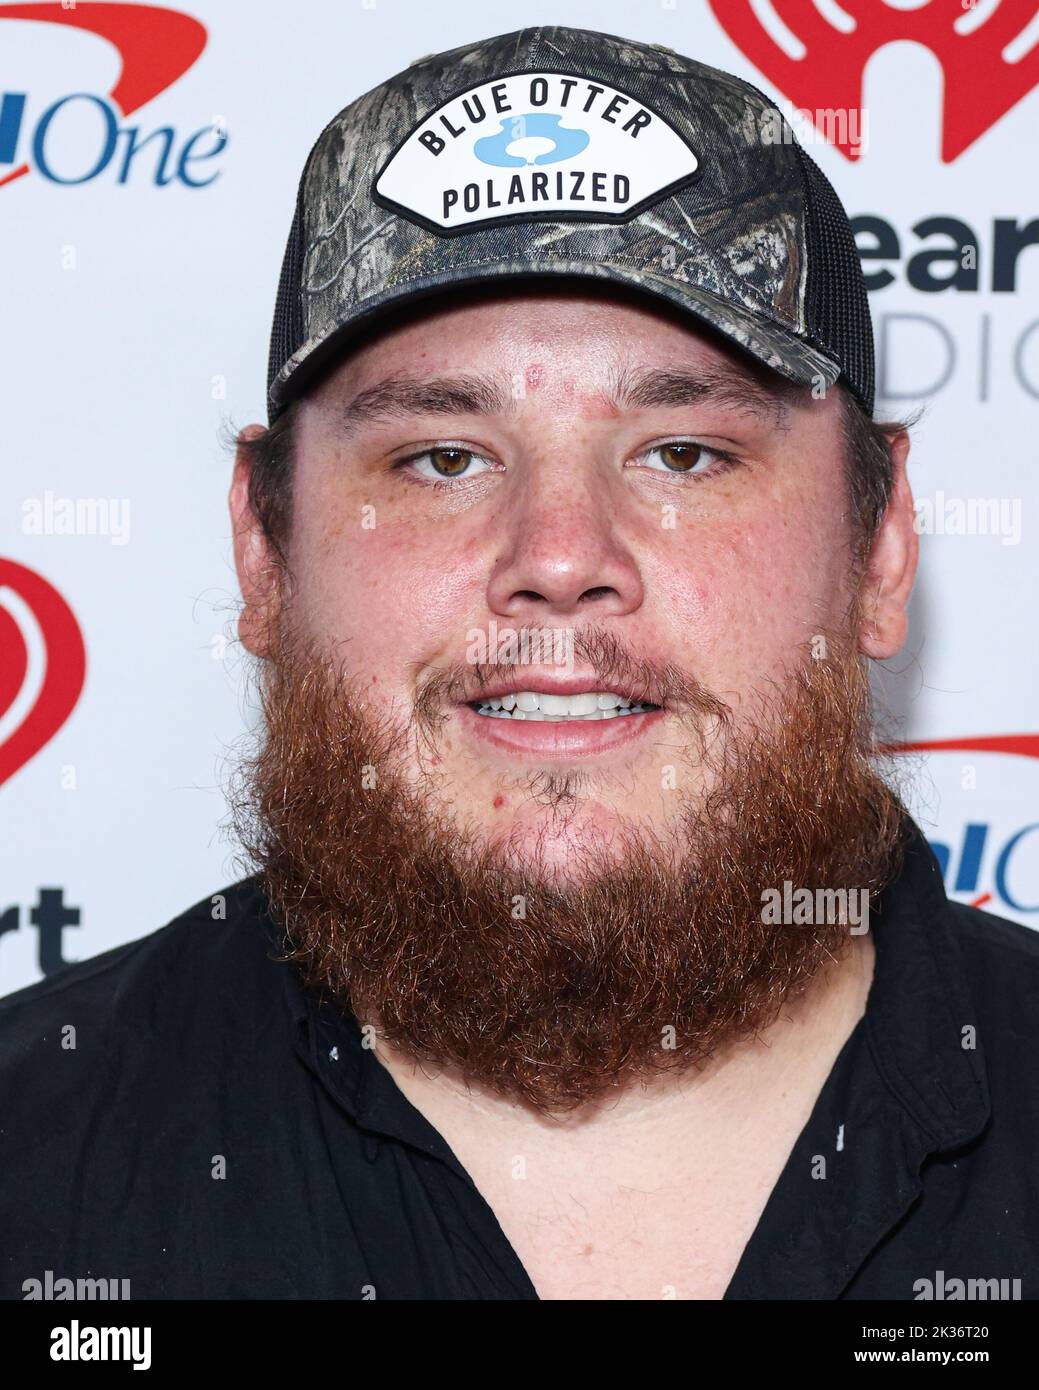 LAS VEGAS, NEVADA, USA - SEPTEMBER 24: Luke Combs poses in the press room at the 2022 iHeartRadio Music Festival - Night 2 held at the T-Mobile Arena on September 24, 2022 in Las Vegas, Nevada, United States. (Photo by Xavier Collin/Image Press Agency) Stock Photo